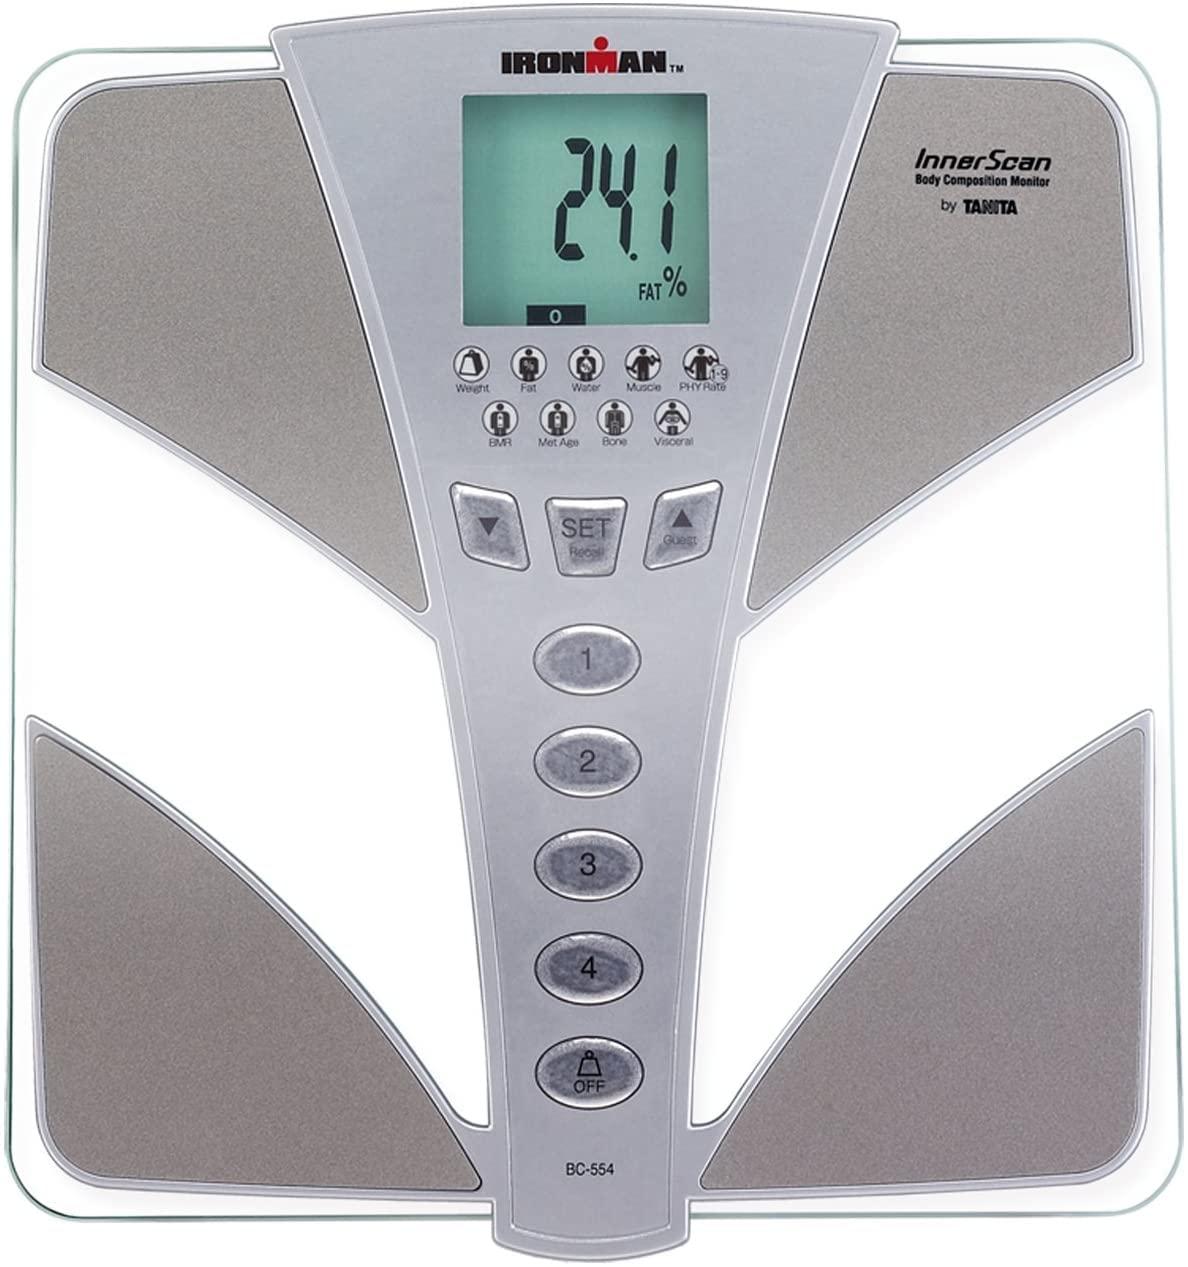 TANITA's BC-554 Ironman, FDA Cleared, World's Only Consumer  Multi-Frequency, Full Body Composition Scale